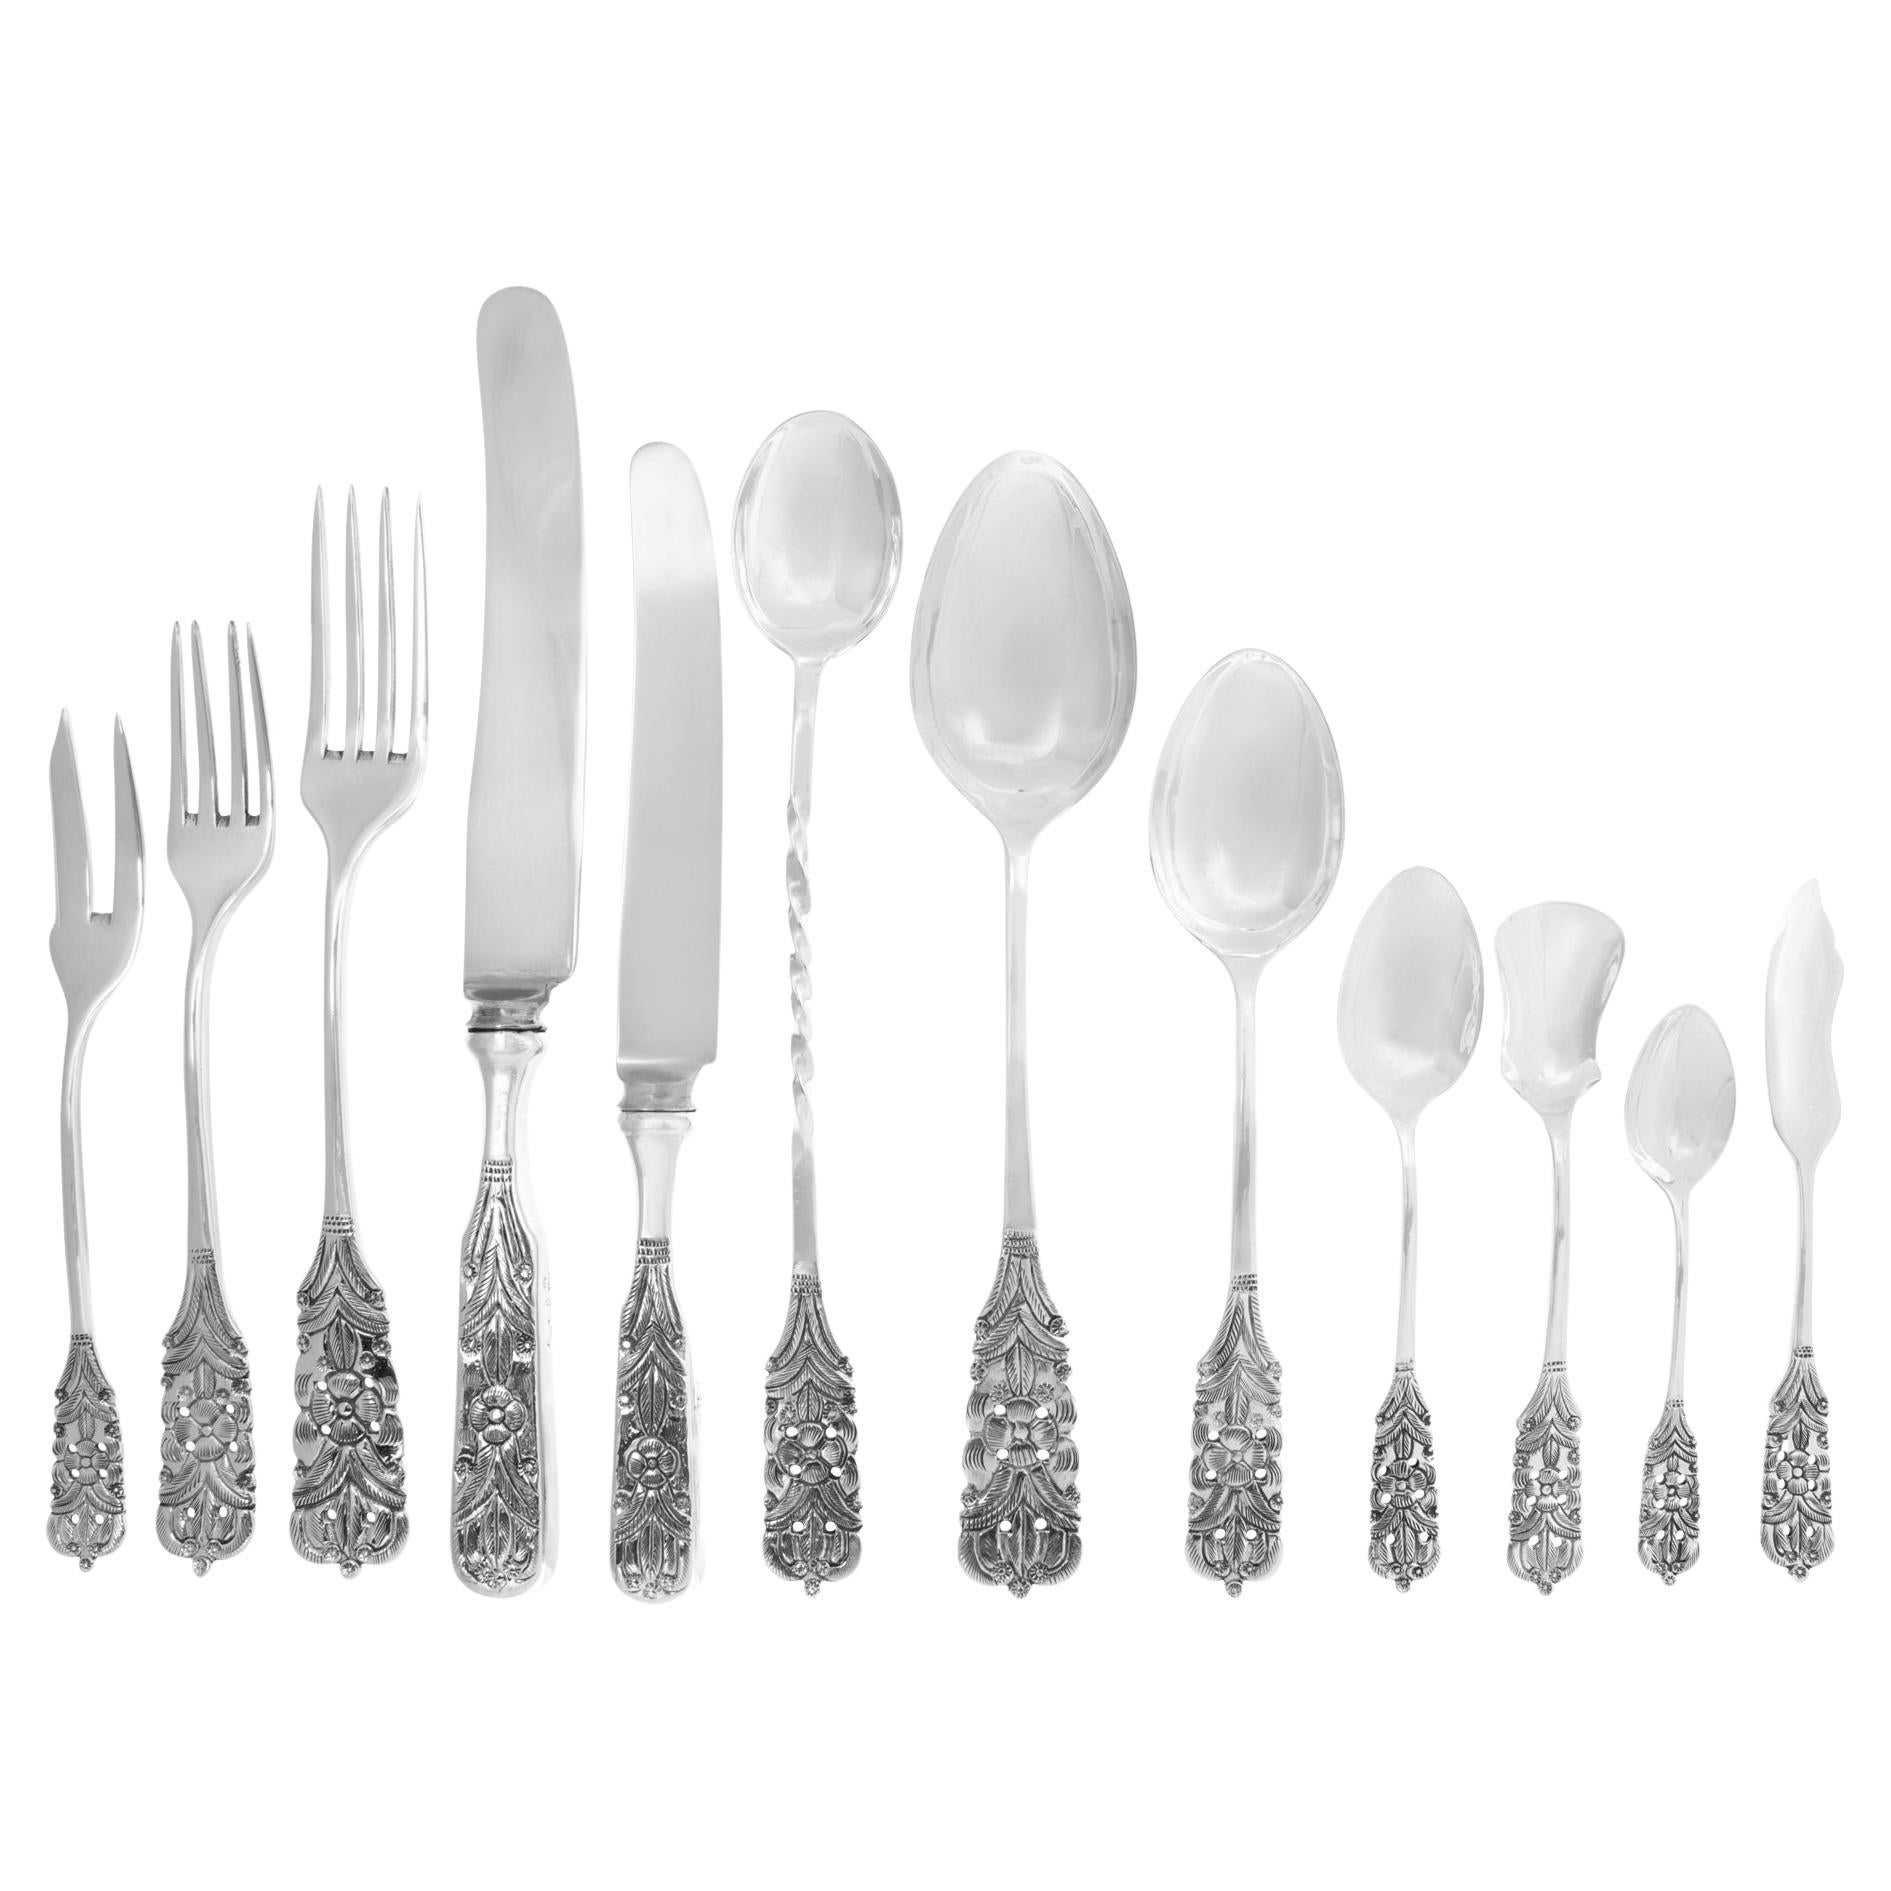 Arias, Peru Solid Sterling Silver Flatware Set-14 Place Setting for 12 For Sale